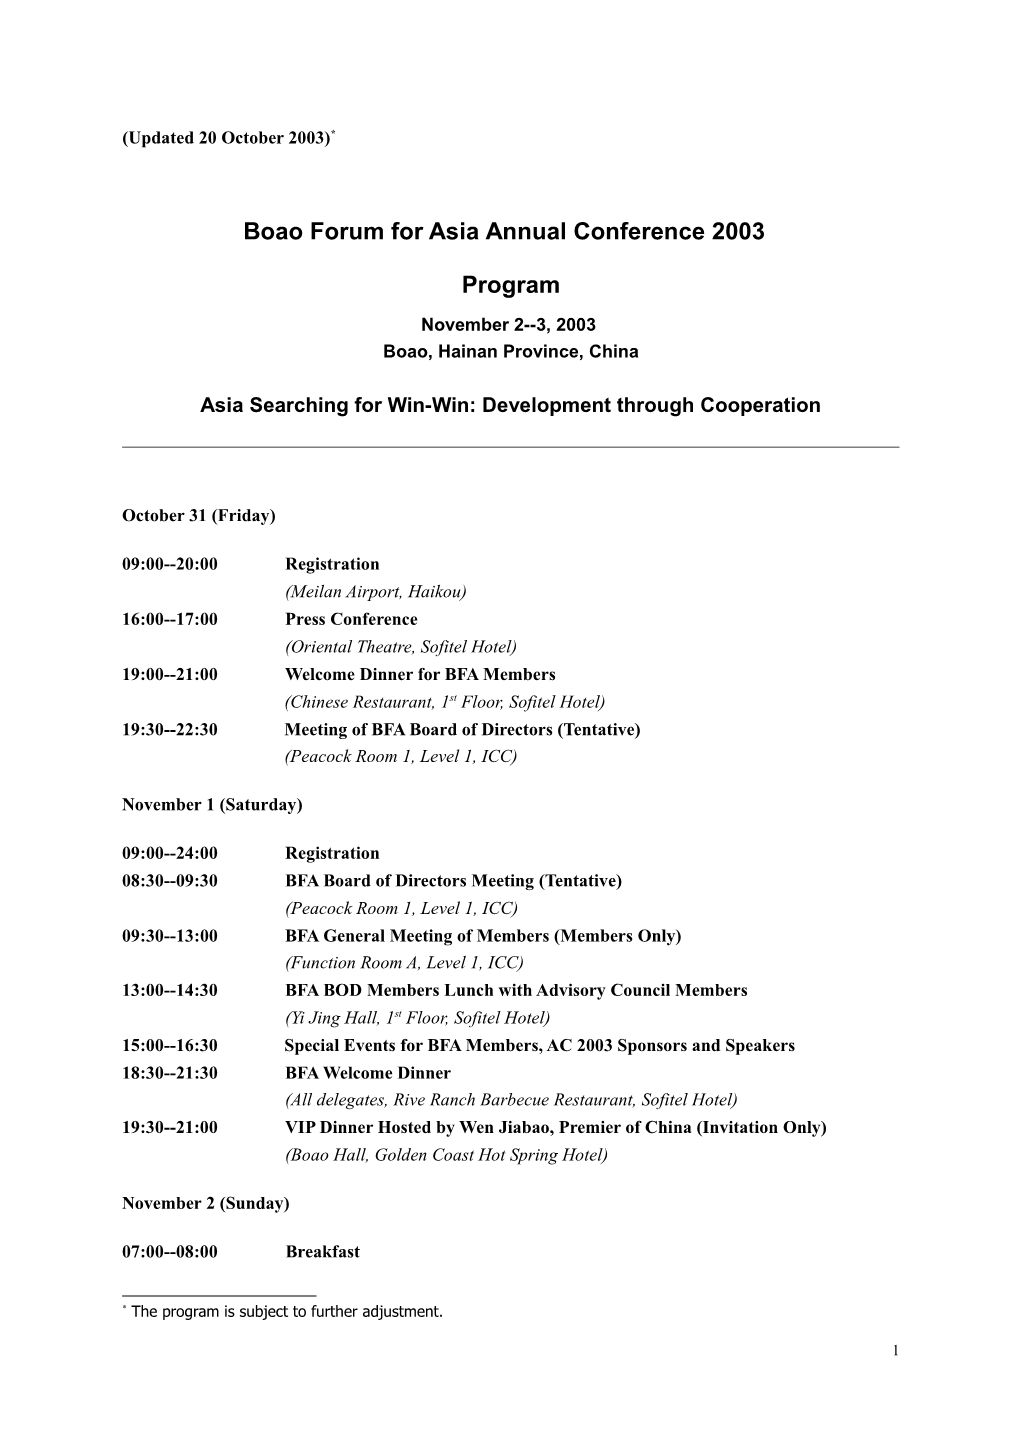 Boao Forum for Asiaannual Conference 2003